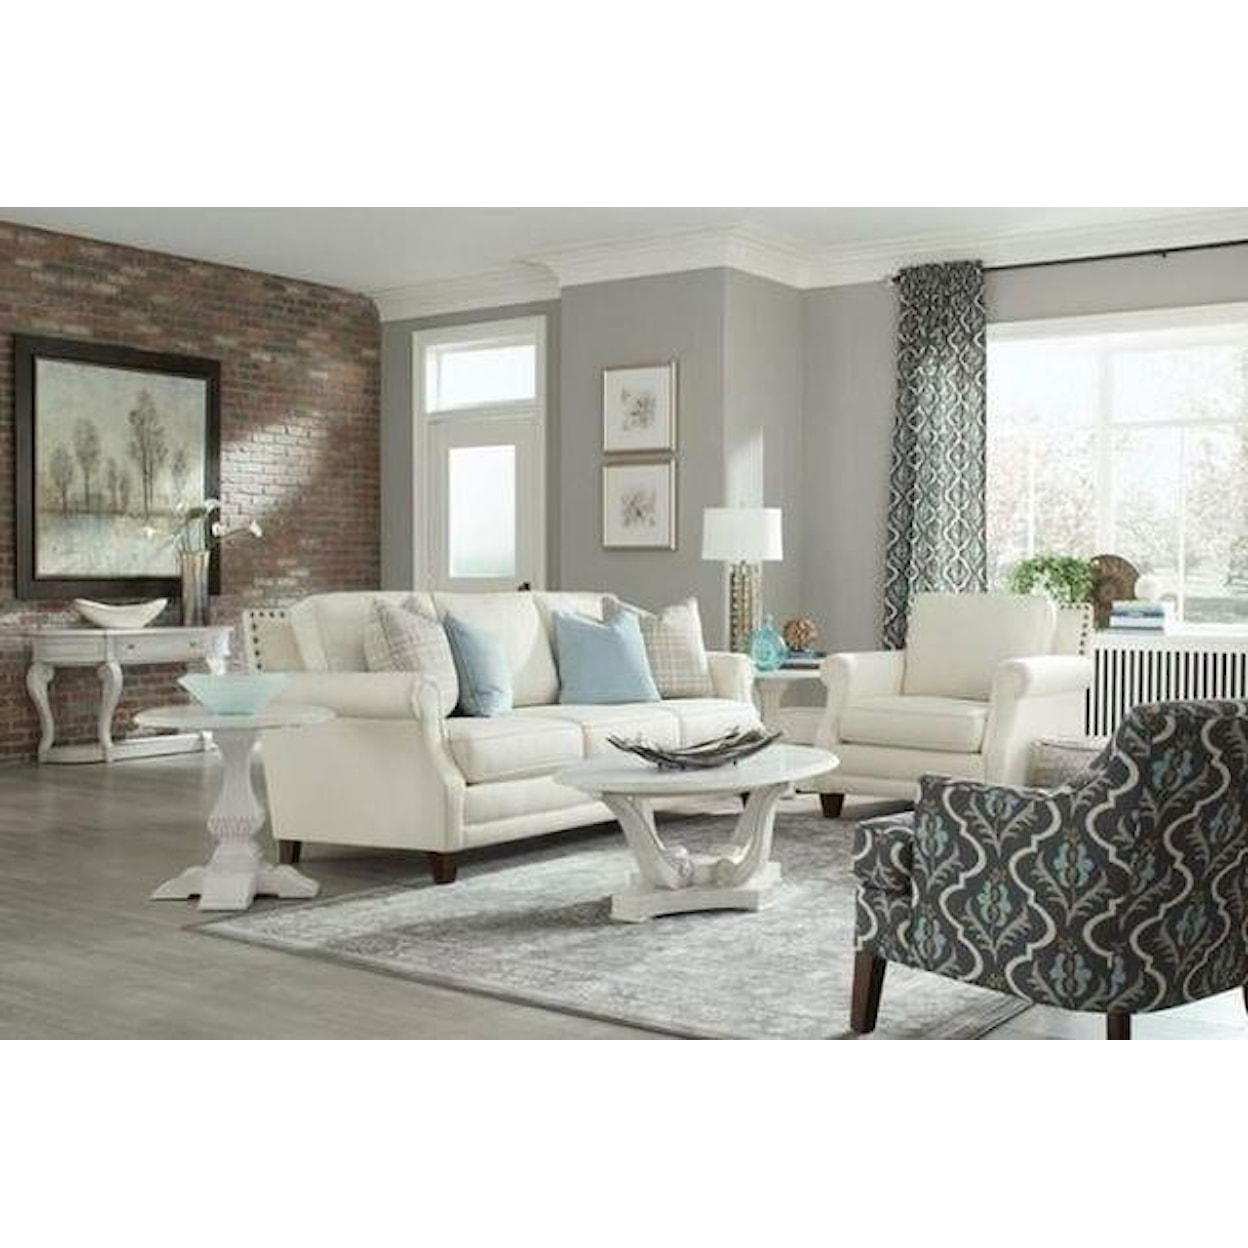 Trisha Yearwood Home Collection by Legacy Classic Jasper County End Table